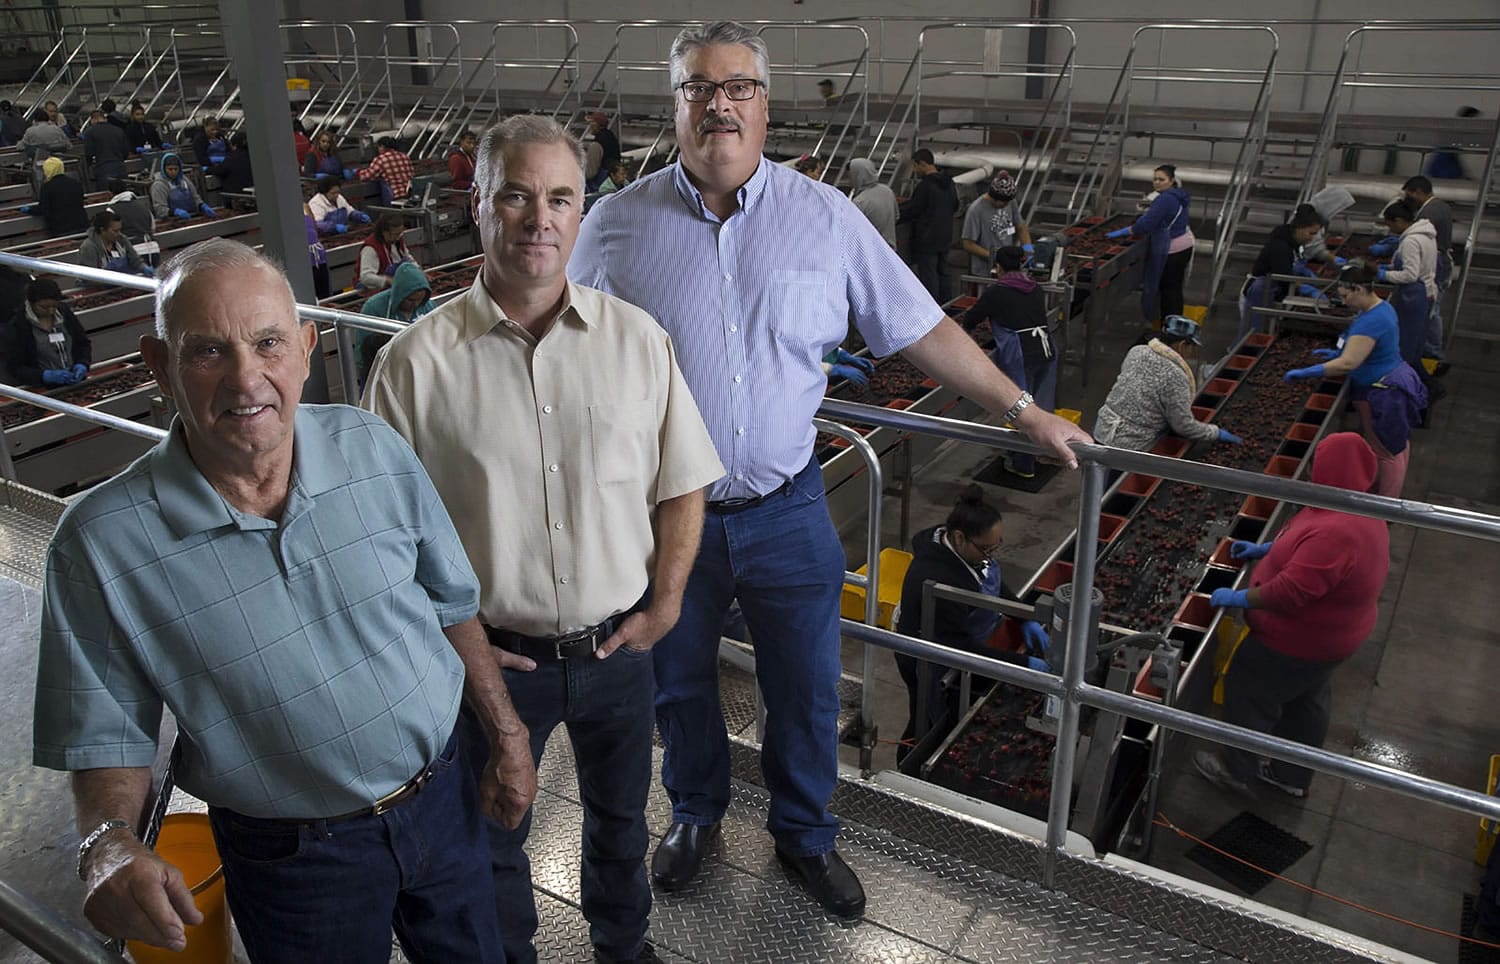 Father's Day often takes on extra meanings in family businesses. Marty Vebrugge, left, and his son Peter, center, have hired Dean Gardner as the CEO of their Wapato family produce business to steer Valley Fruit through future generational successions.